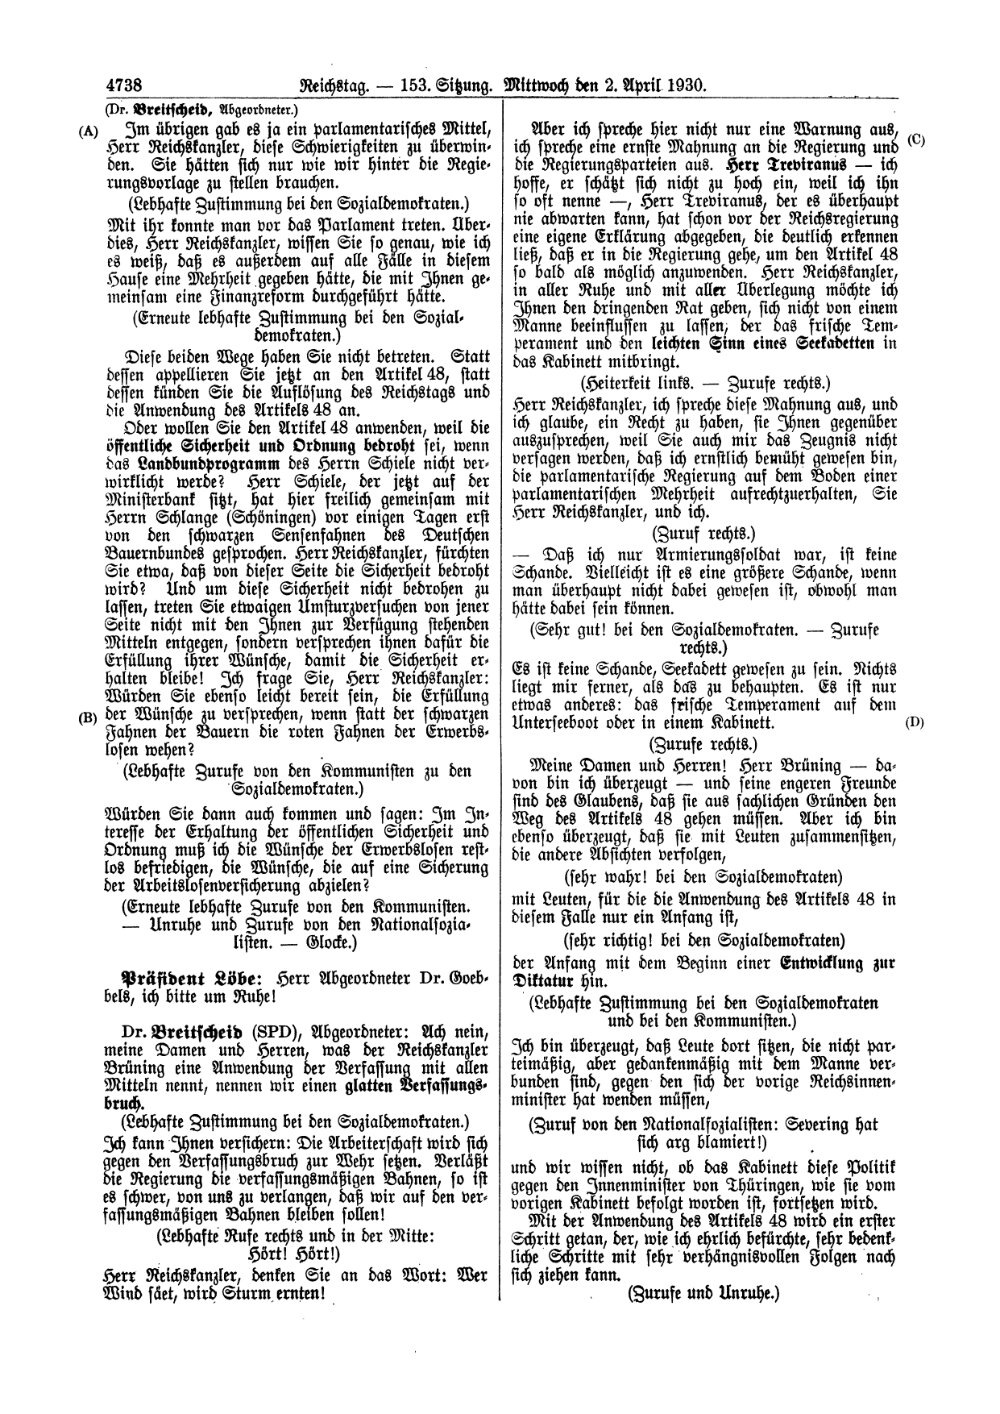 Scan of page 4738